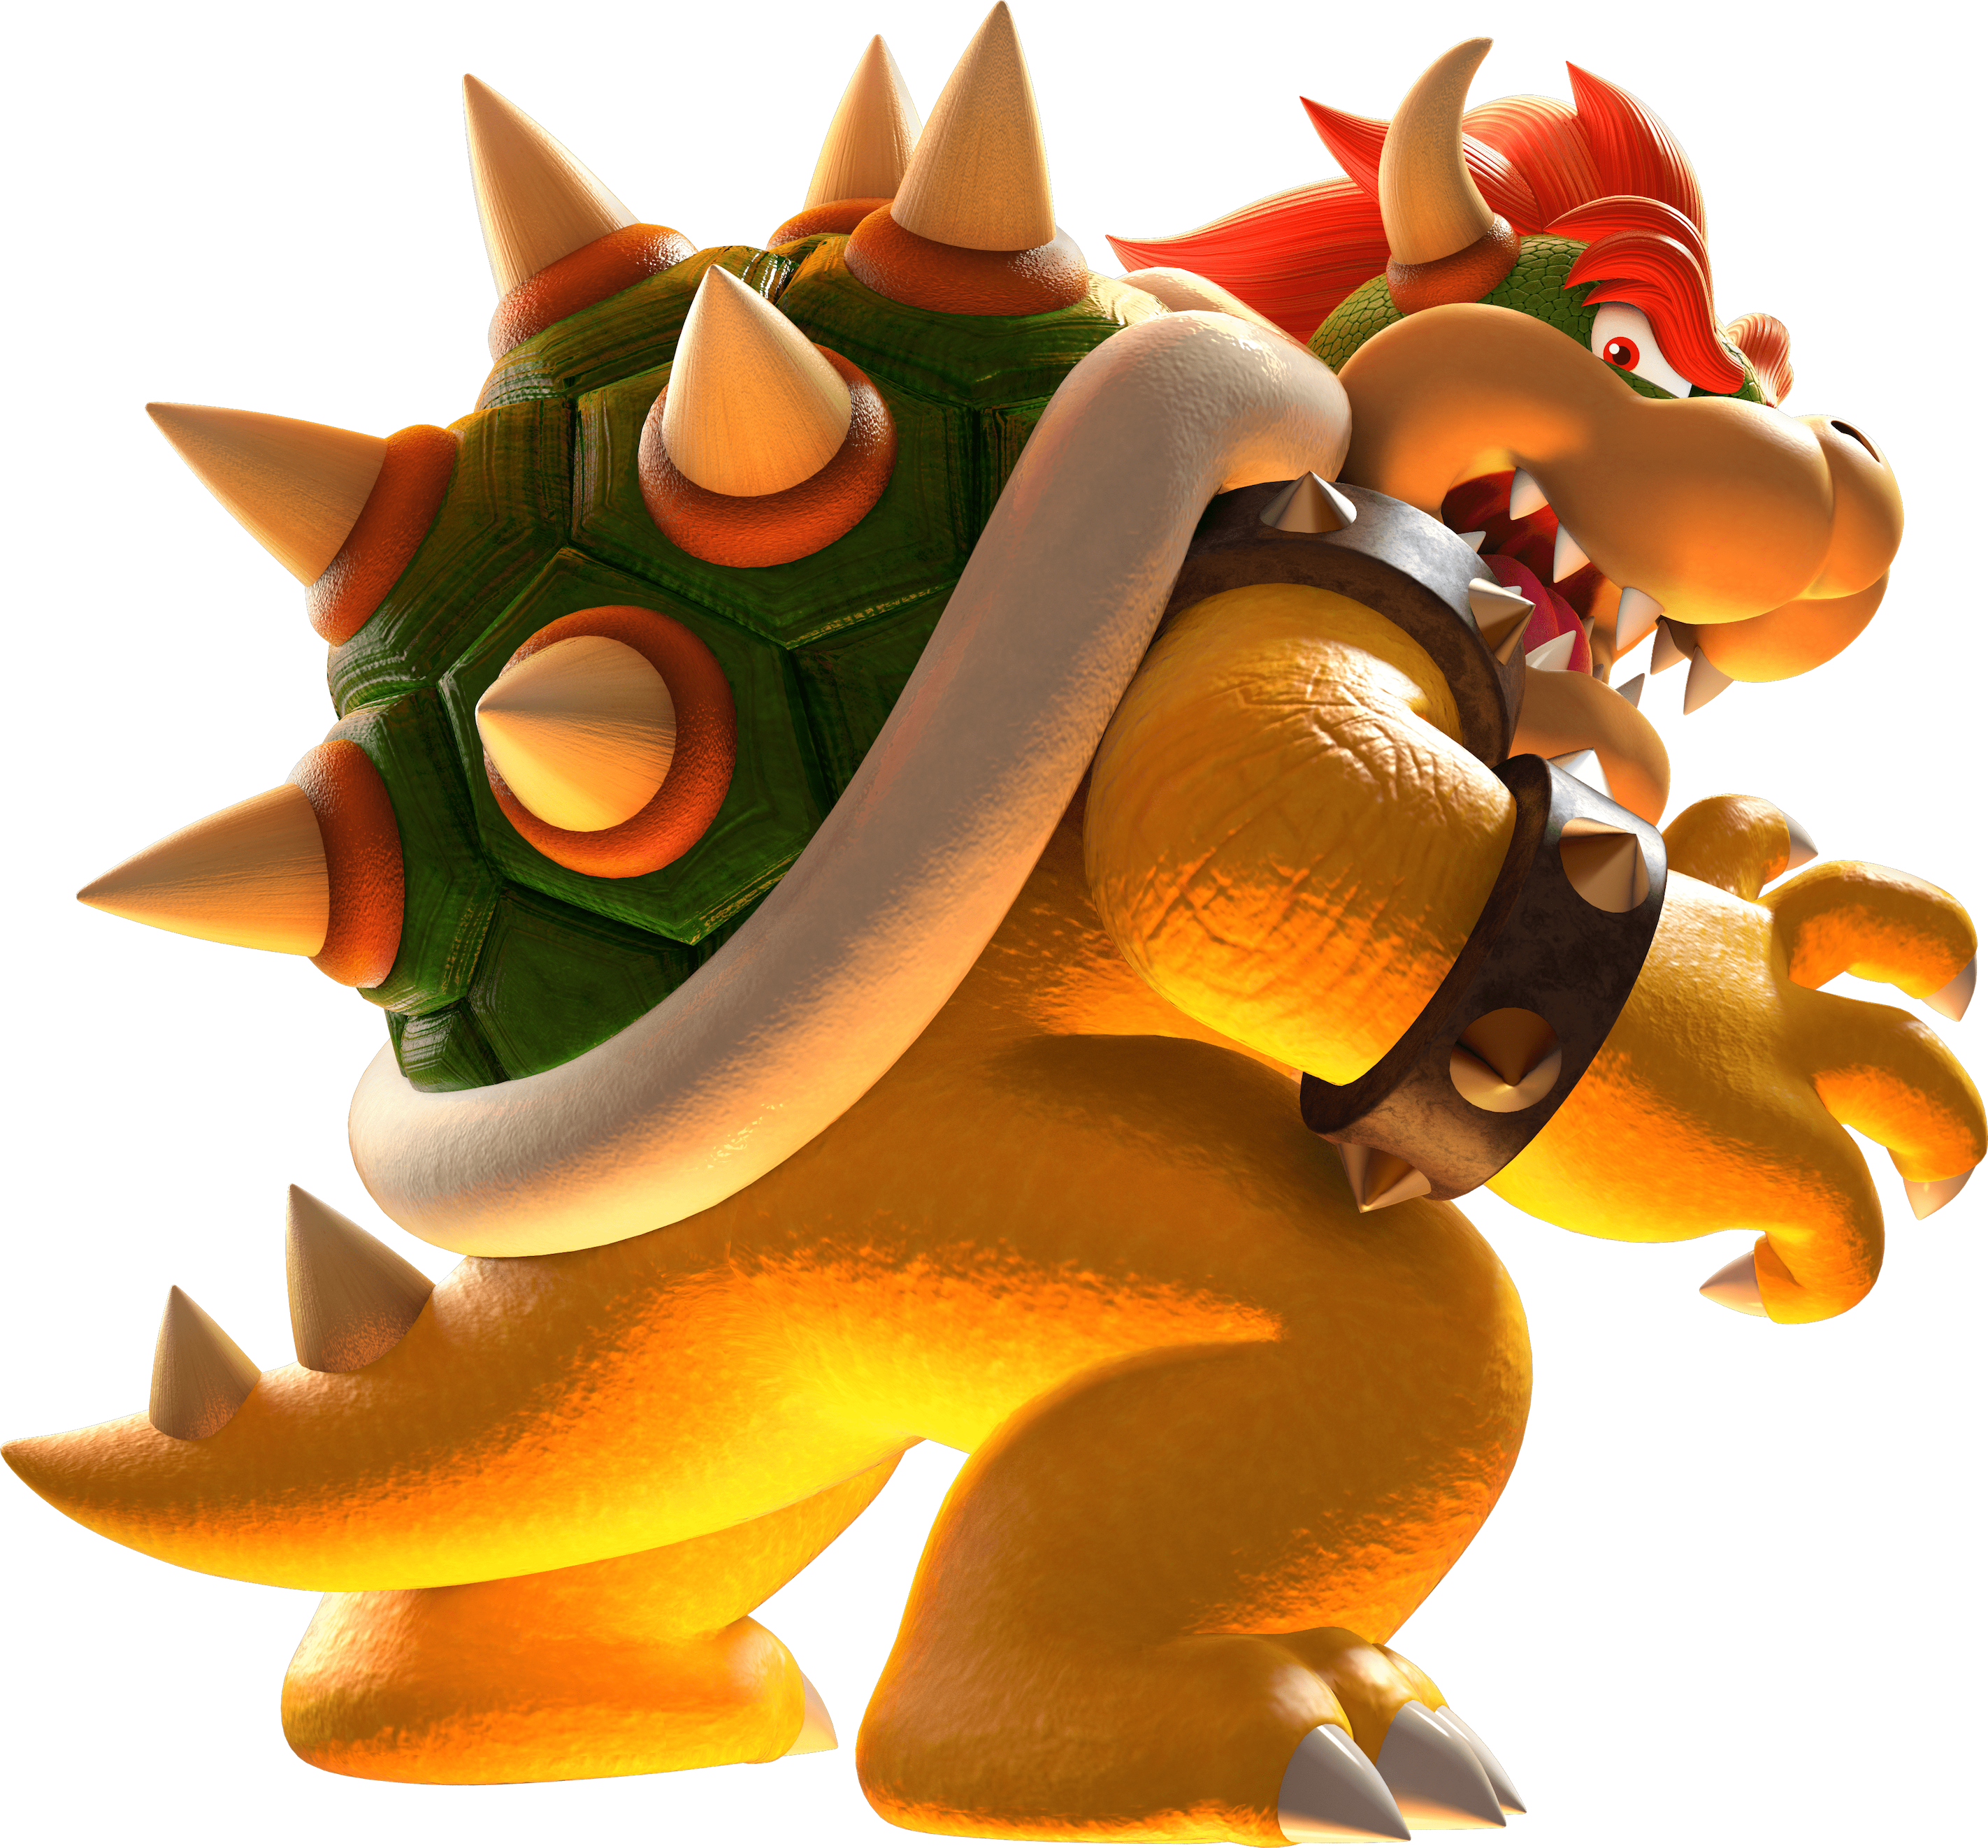 The complicated love triangle between Mario, Bowser, and Princess